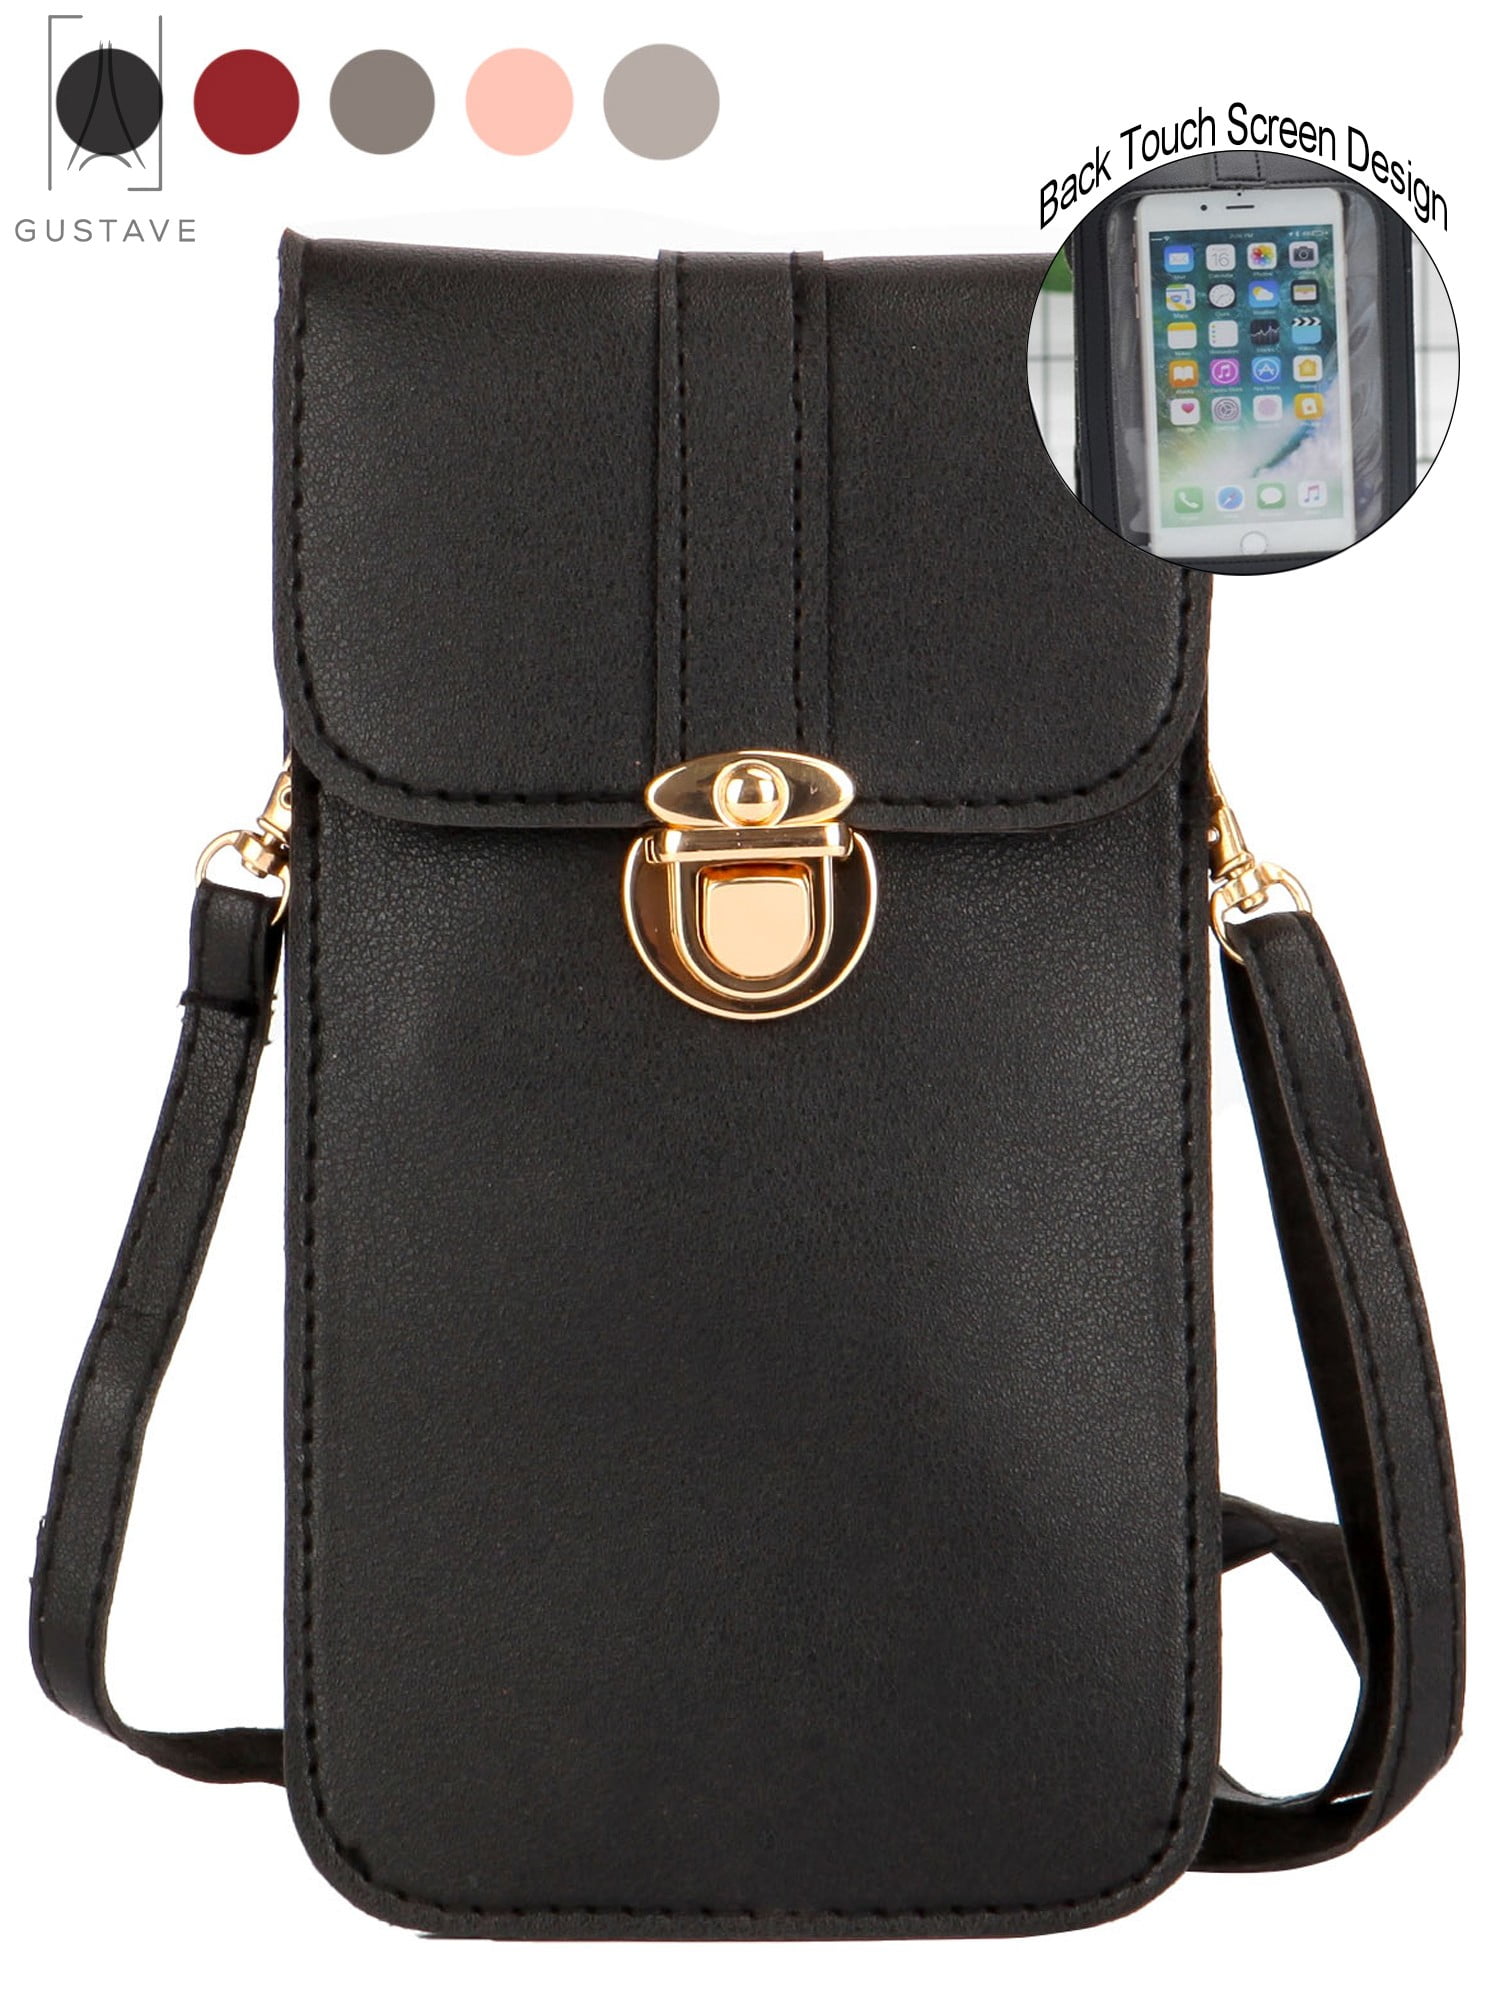 Up To 83% Off on Mini Crossbody Bag Phone Purs... | Groupon Goods